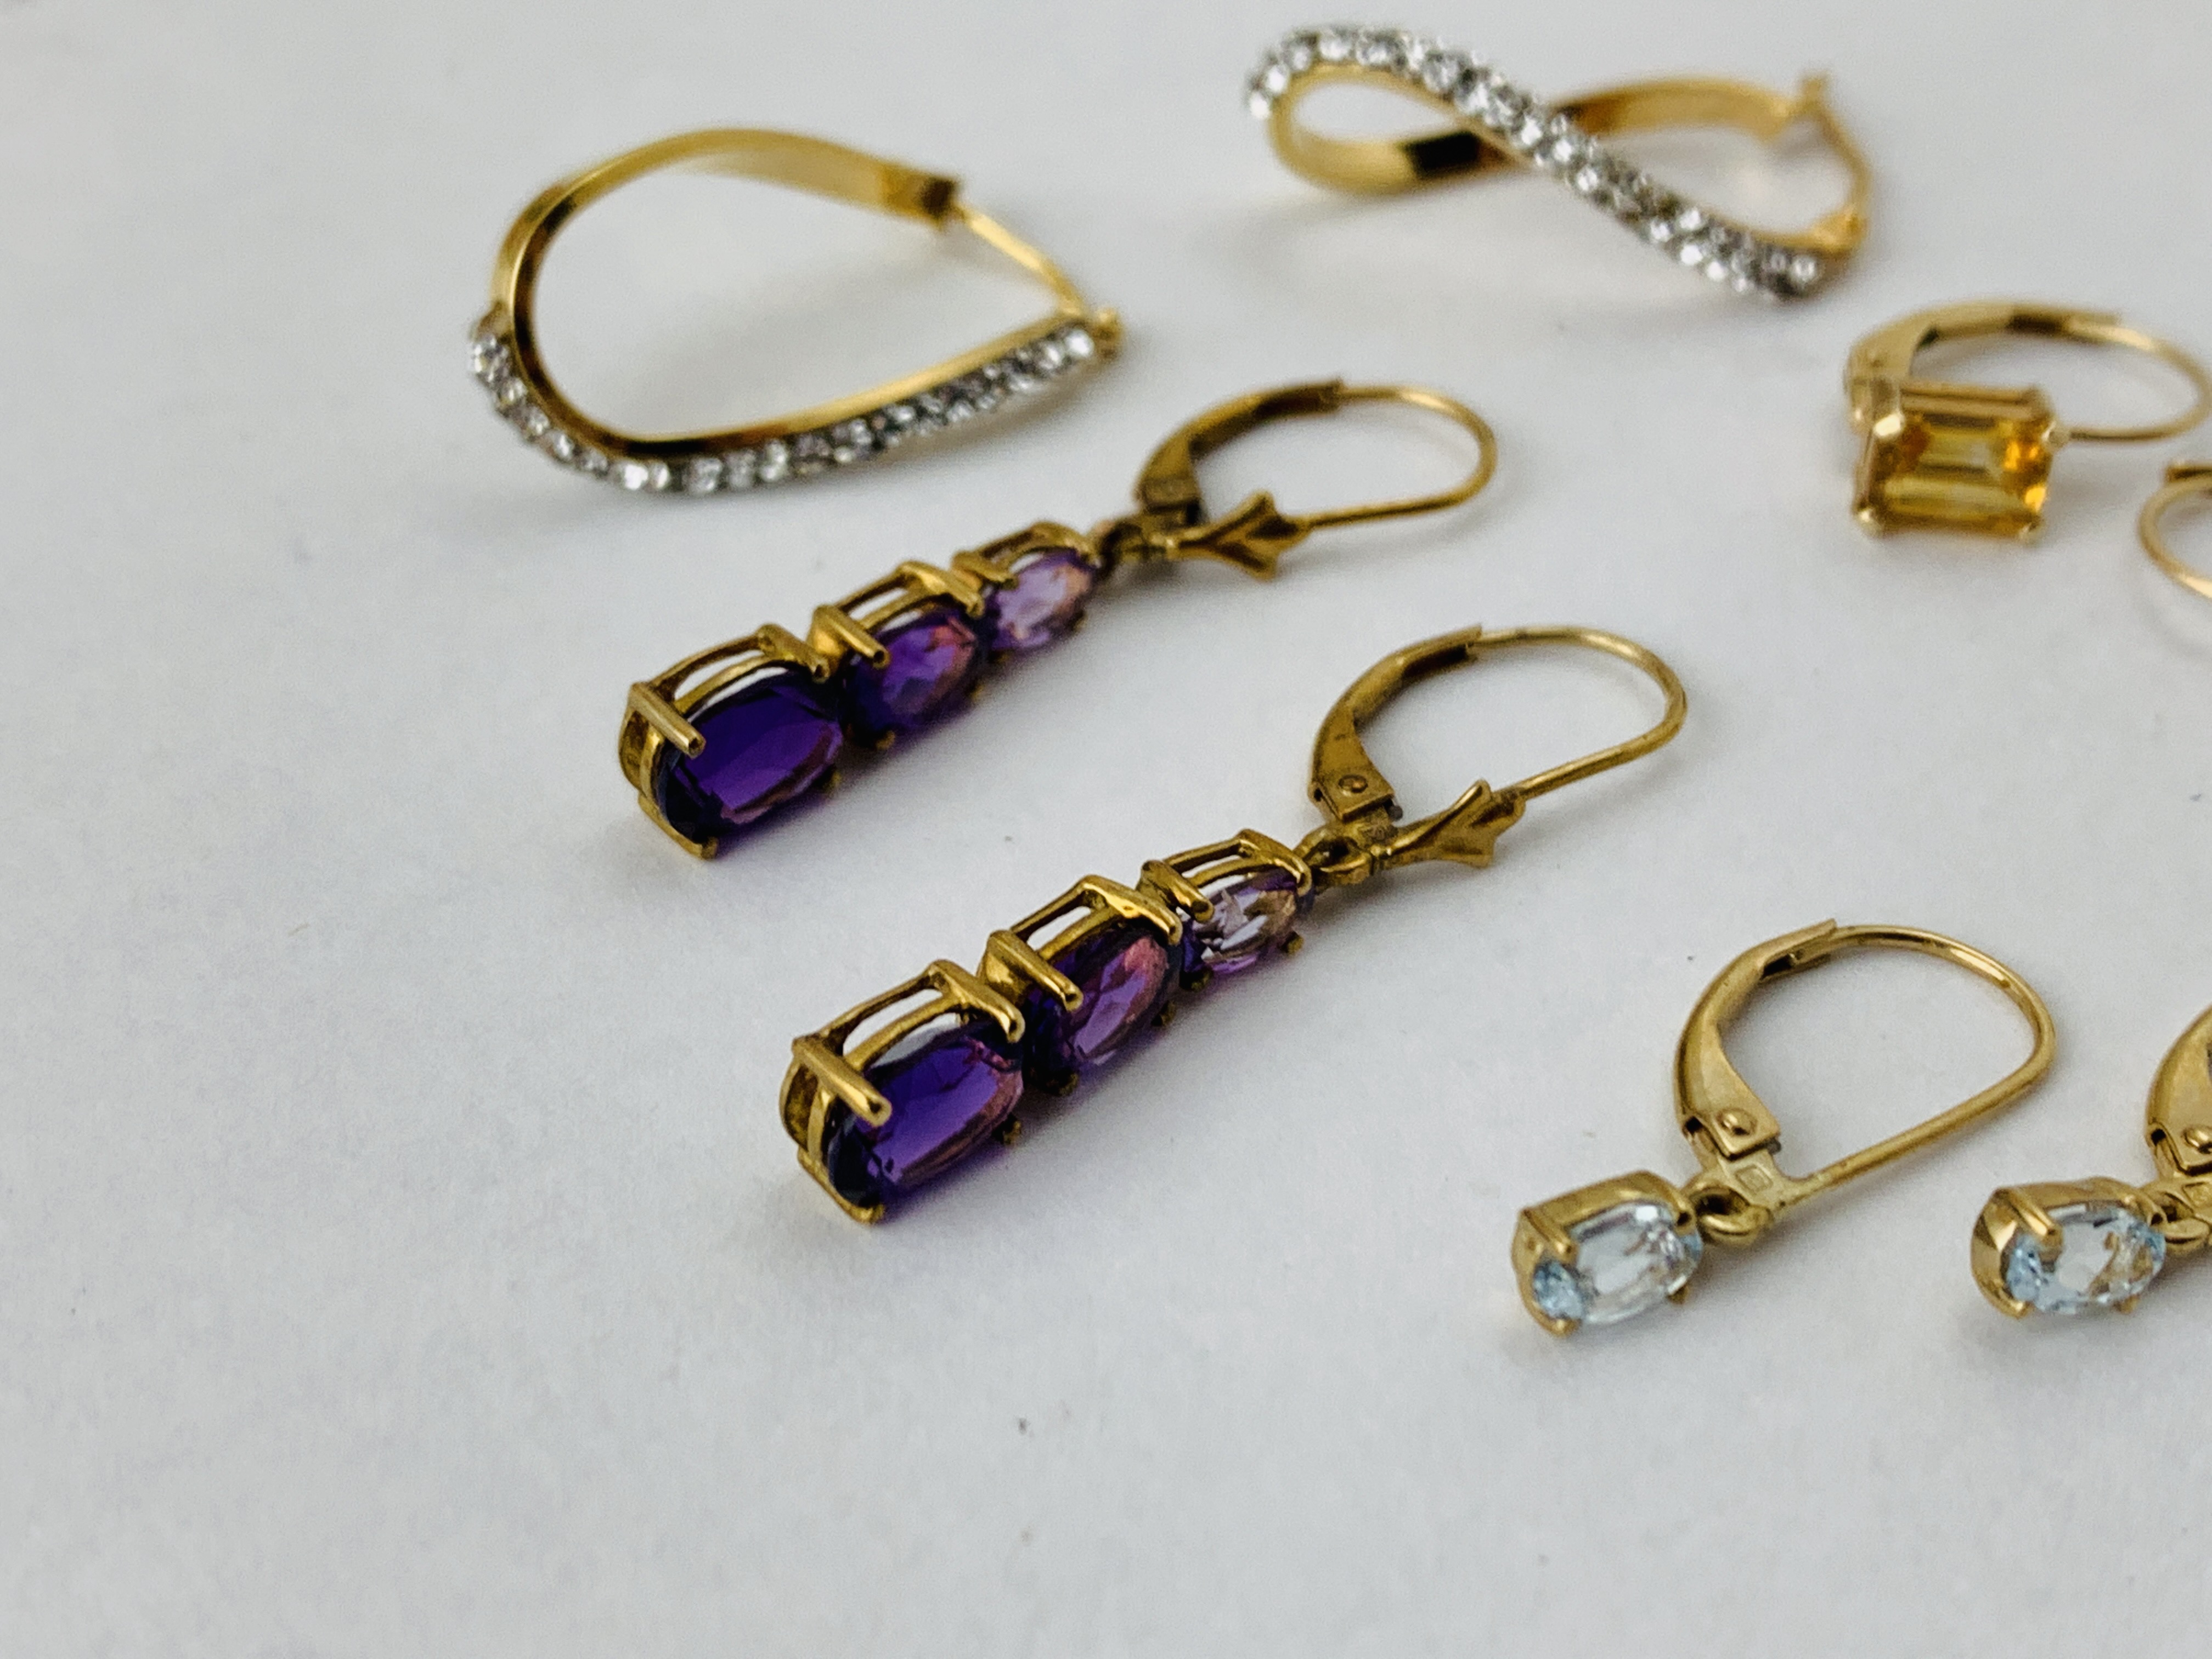 4 X PAIRS OF 9CT GOLD STONE SET DESIGNER EARRINGS - Image 3 of 7